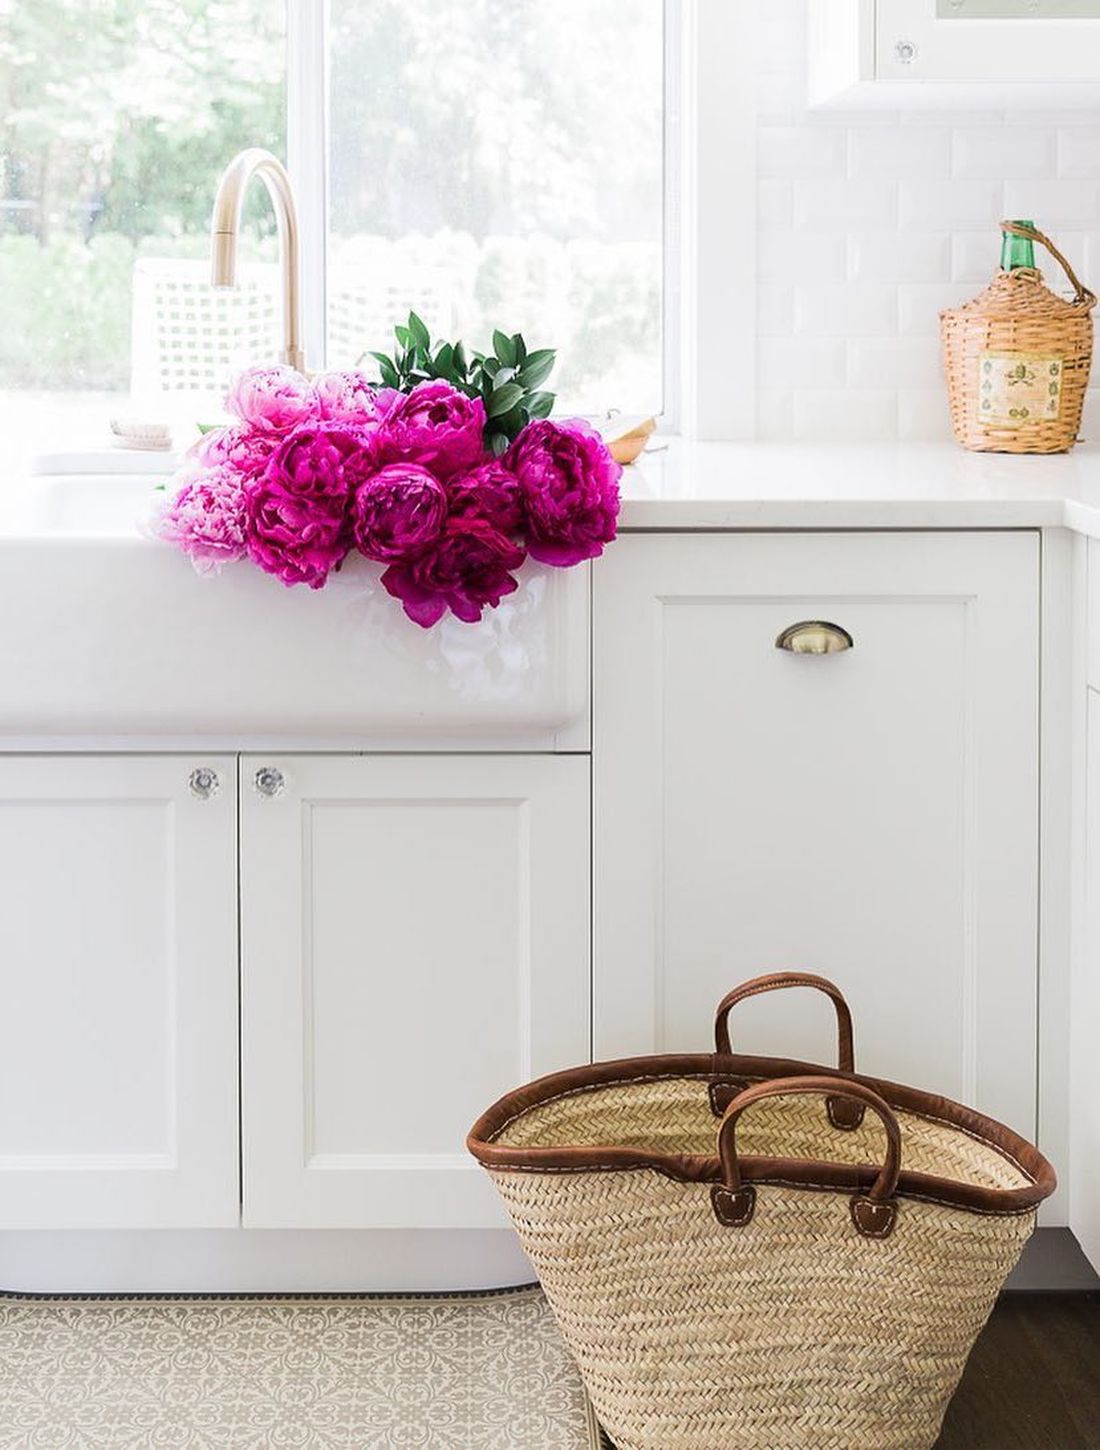 French Country Kitchen with Apron Front Sink via @somuchbetterwithage